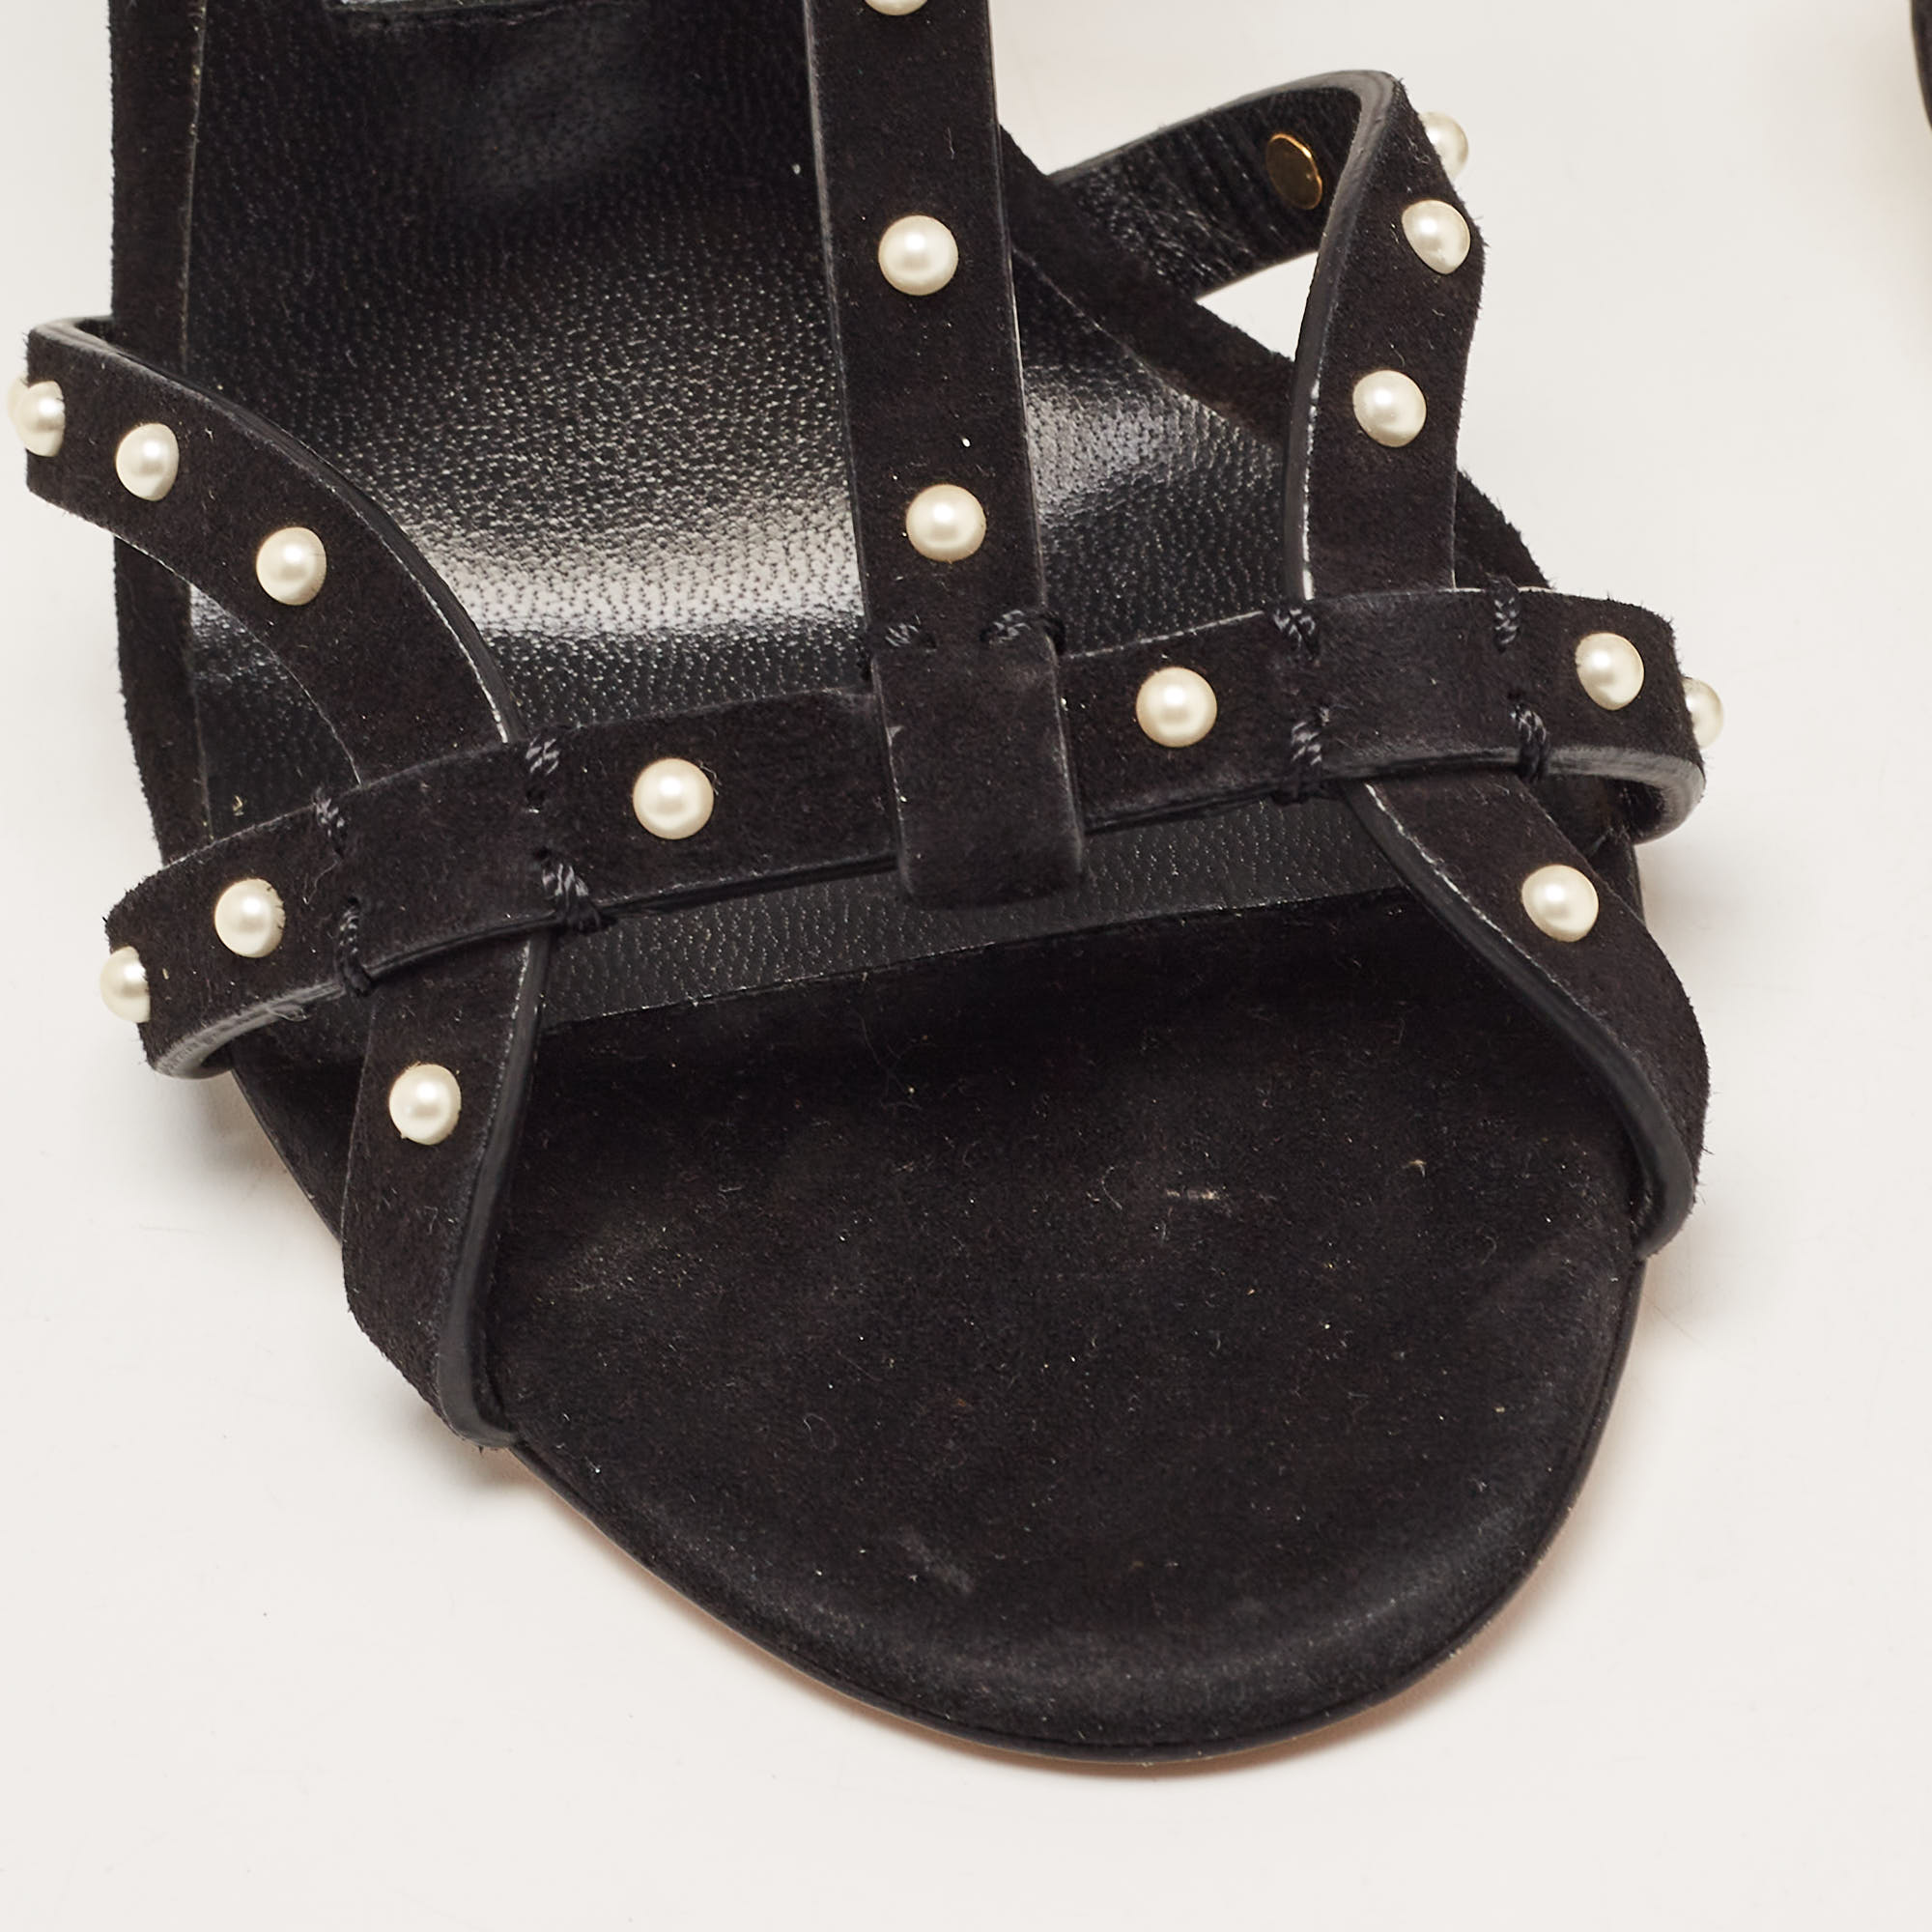 Jimmy Choo Black Suede Faux Pearl Studded Beverly Ankle Strap Sandals Size 35